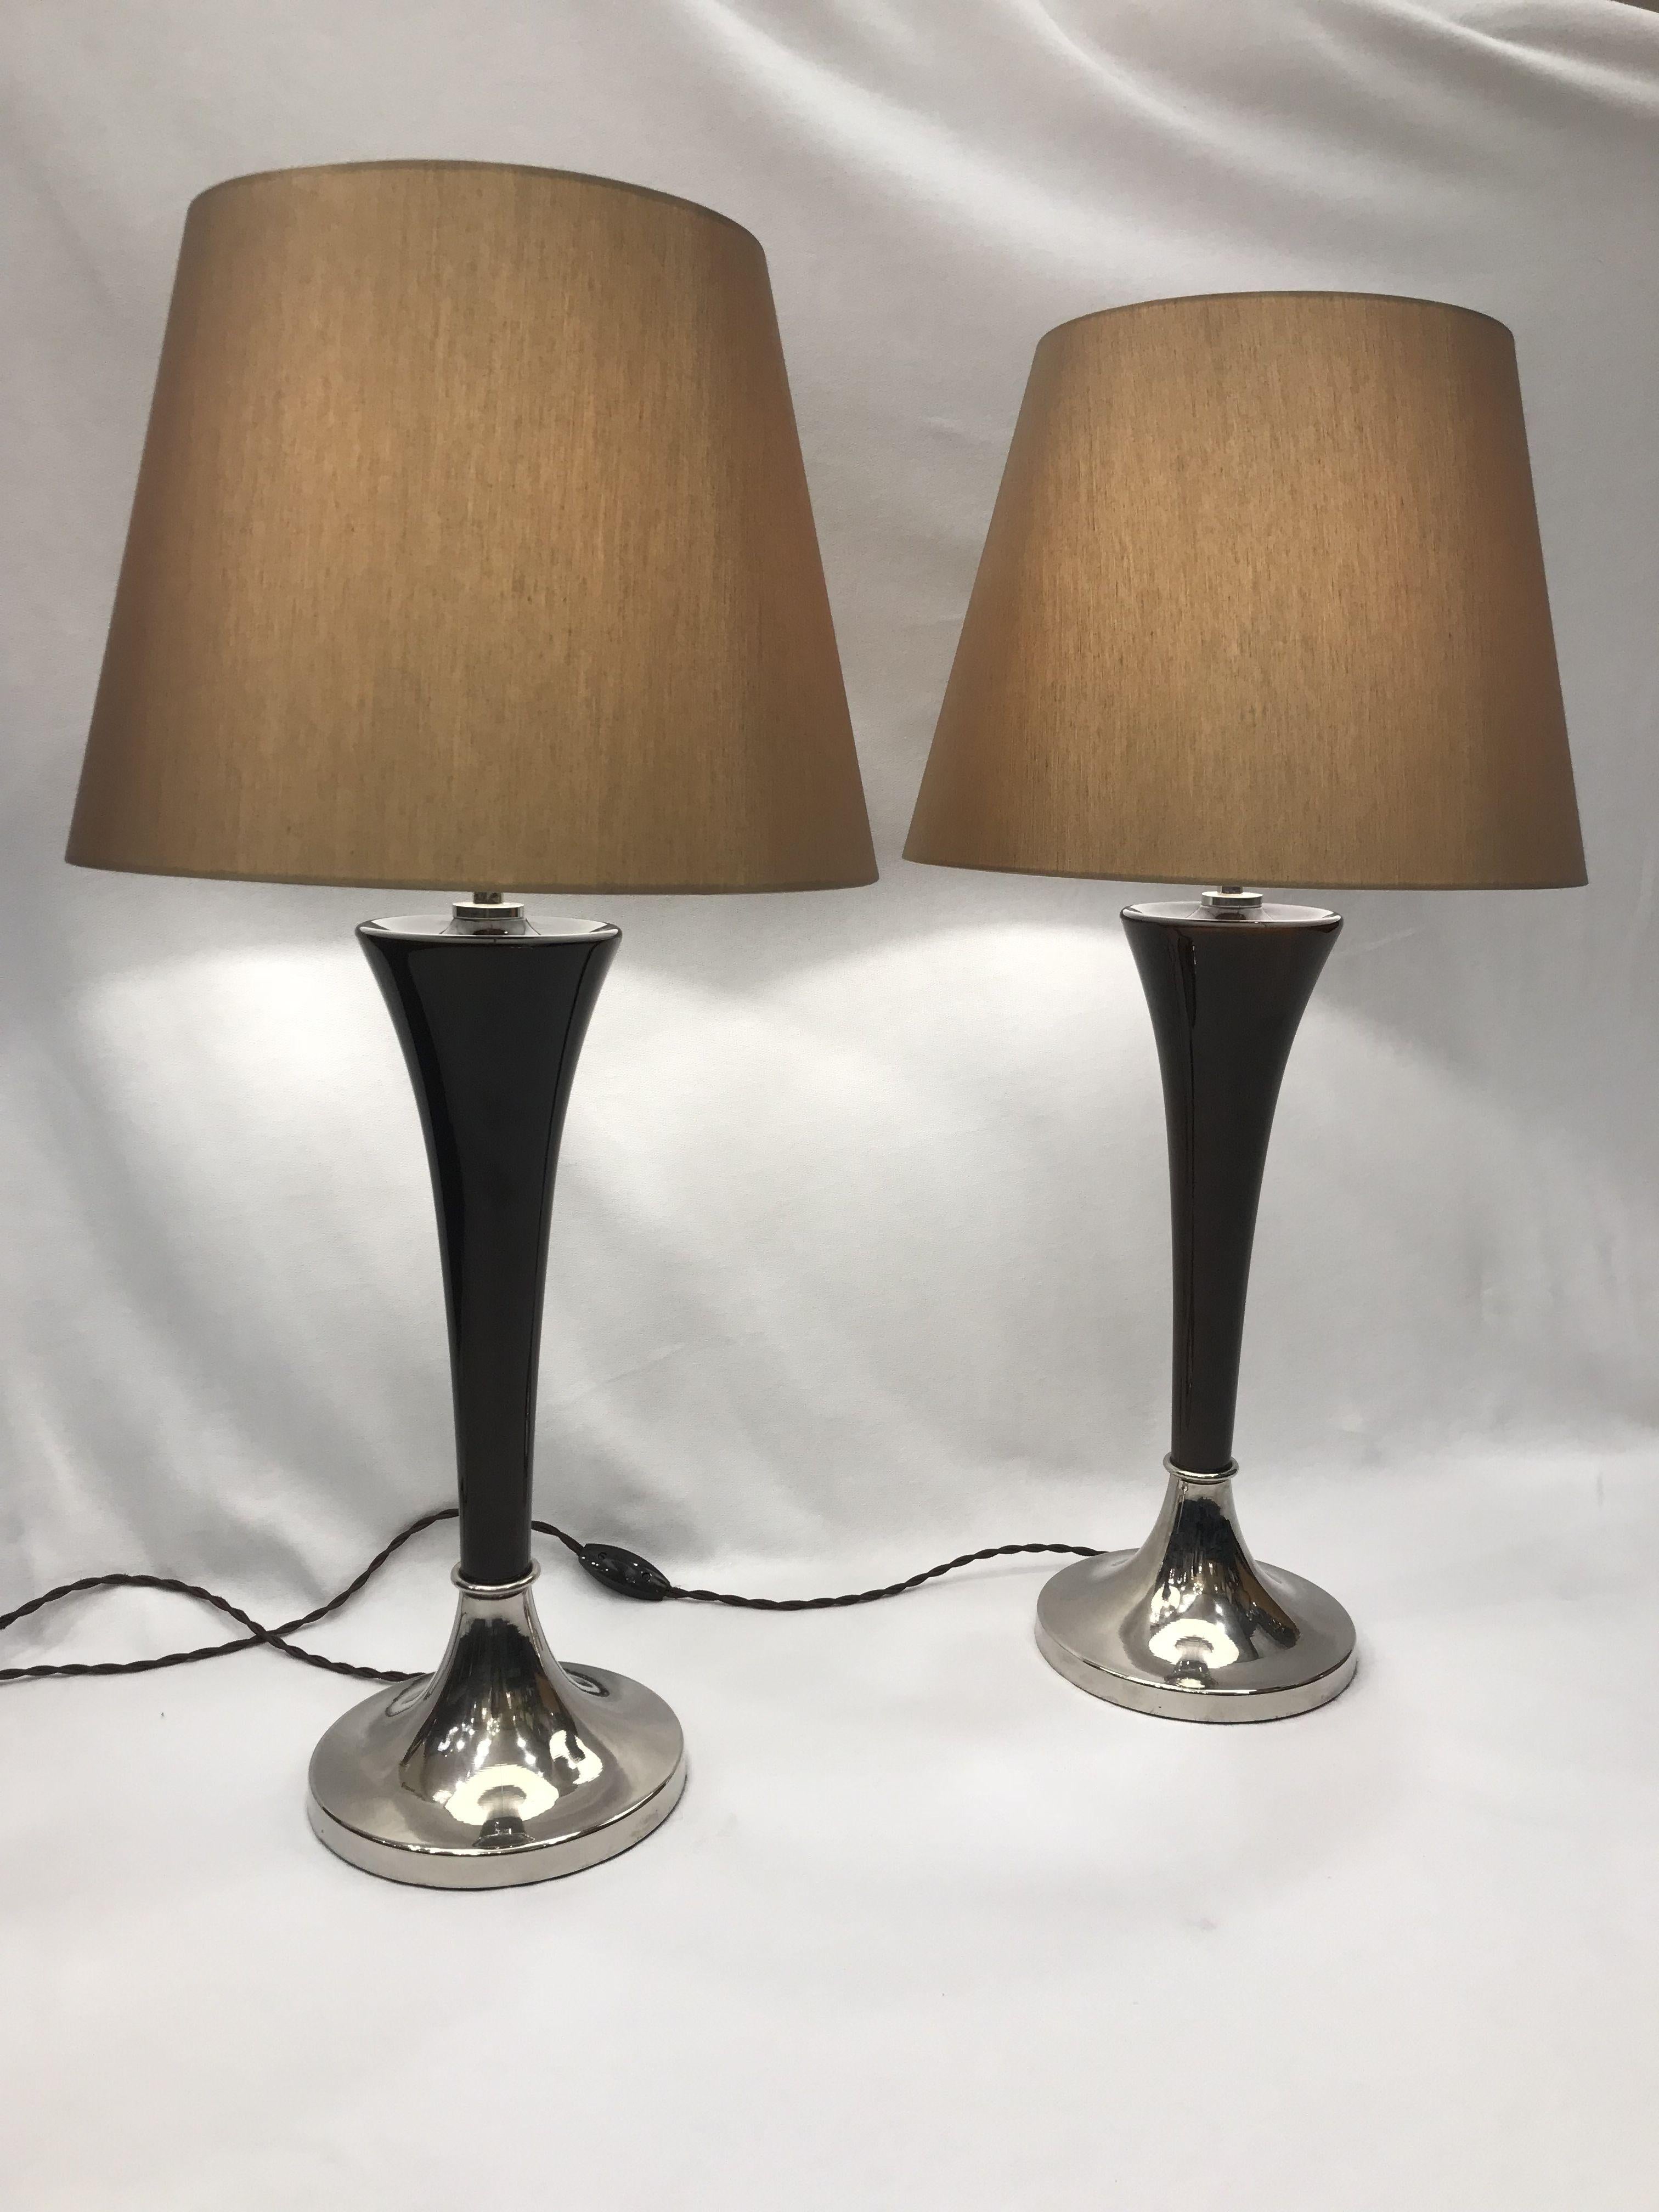 Amazing table lamps in Art Deco style with elegant colorized, lacquered solid beech-wood body and nickel-plated metal base. There were made in Hungary. Lamps are newly rewired and have new shades. Shades are available in different colors, black or